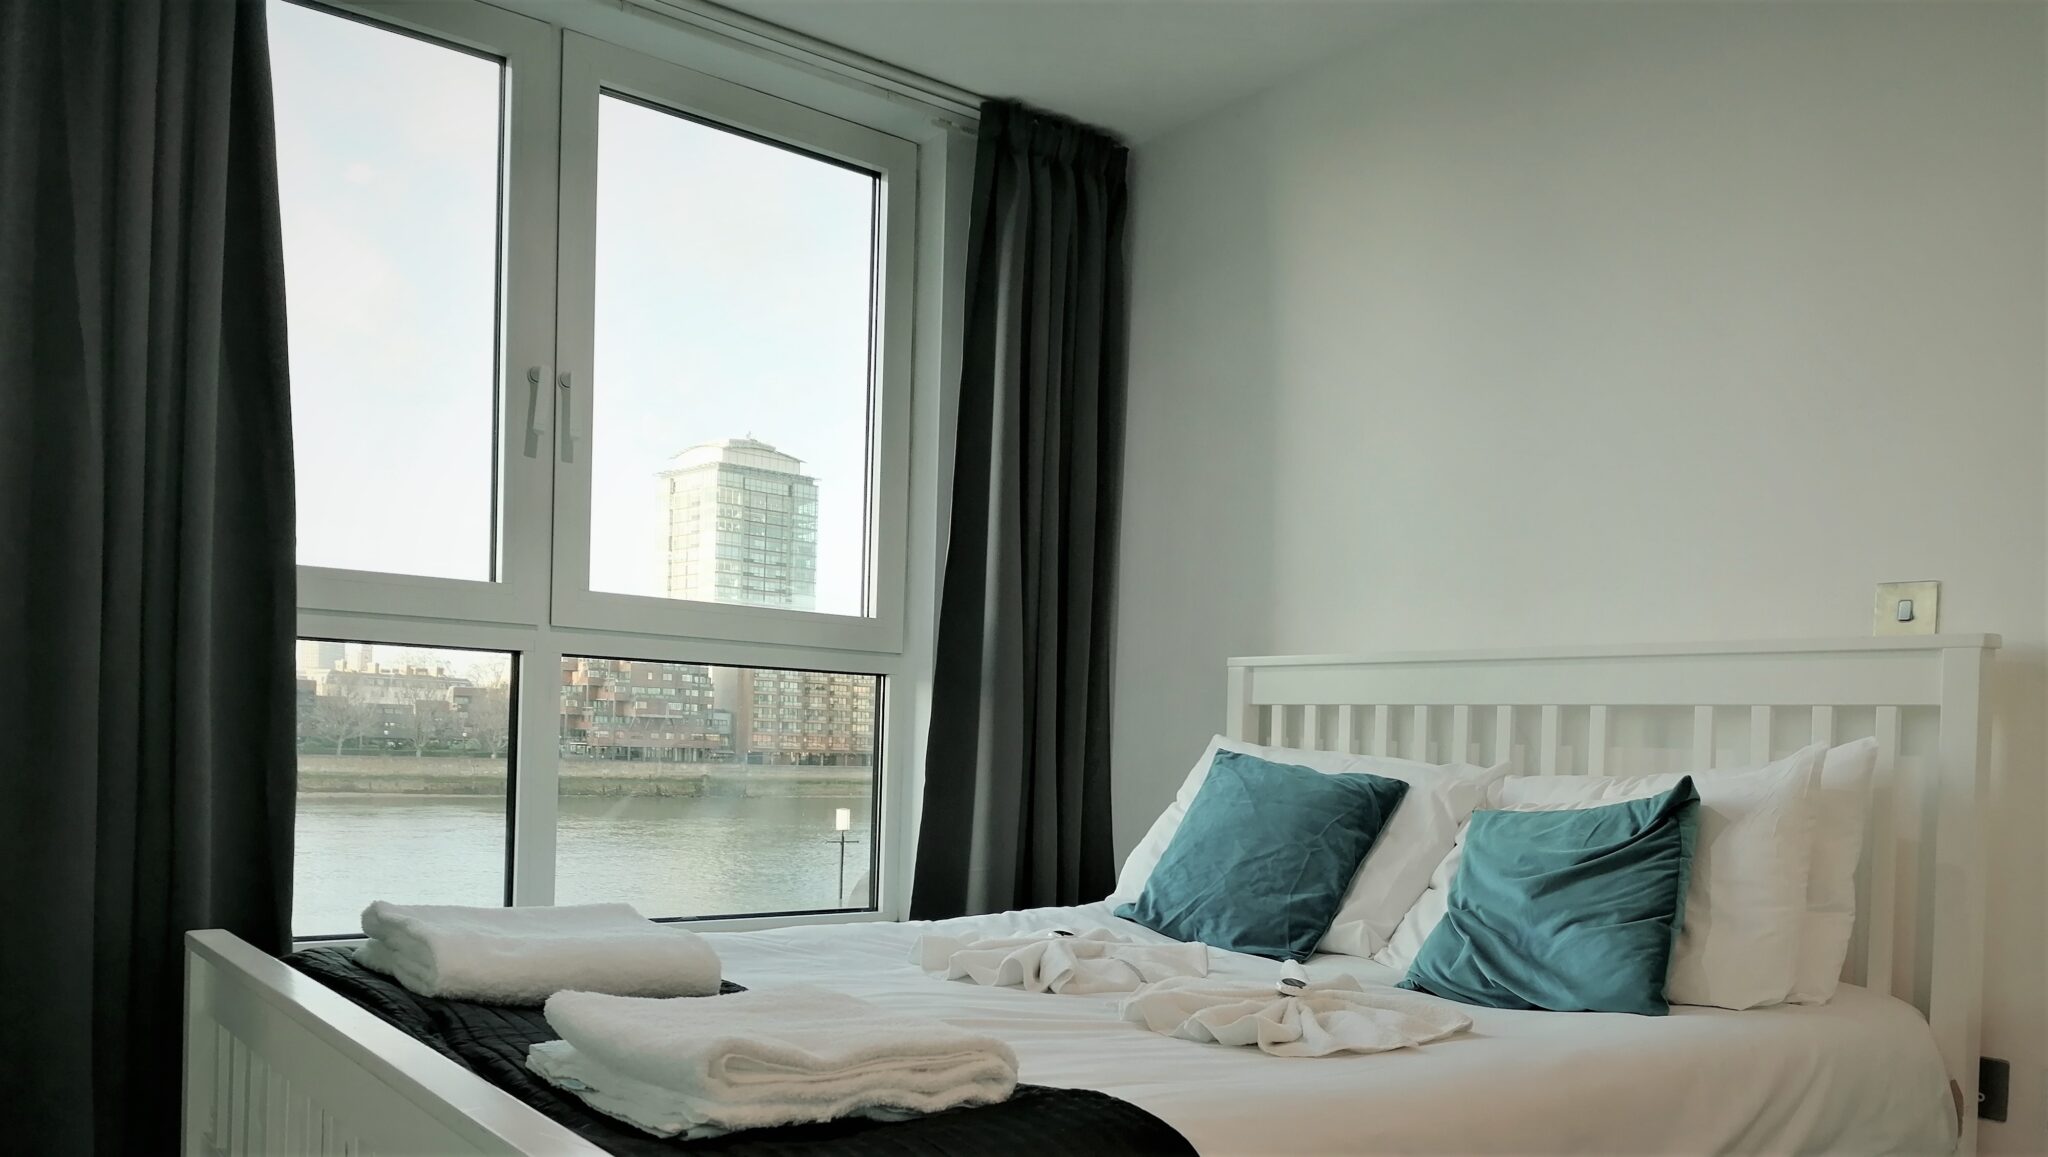 Lanterns Court Apartments - East London Serviced Apartments - London | Urban Stay